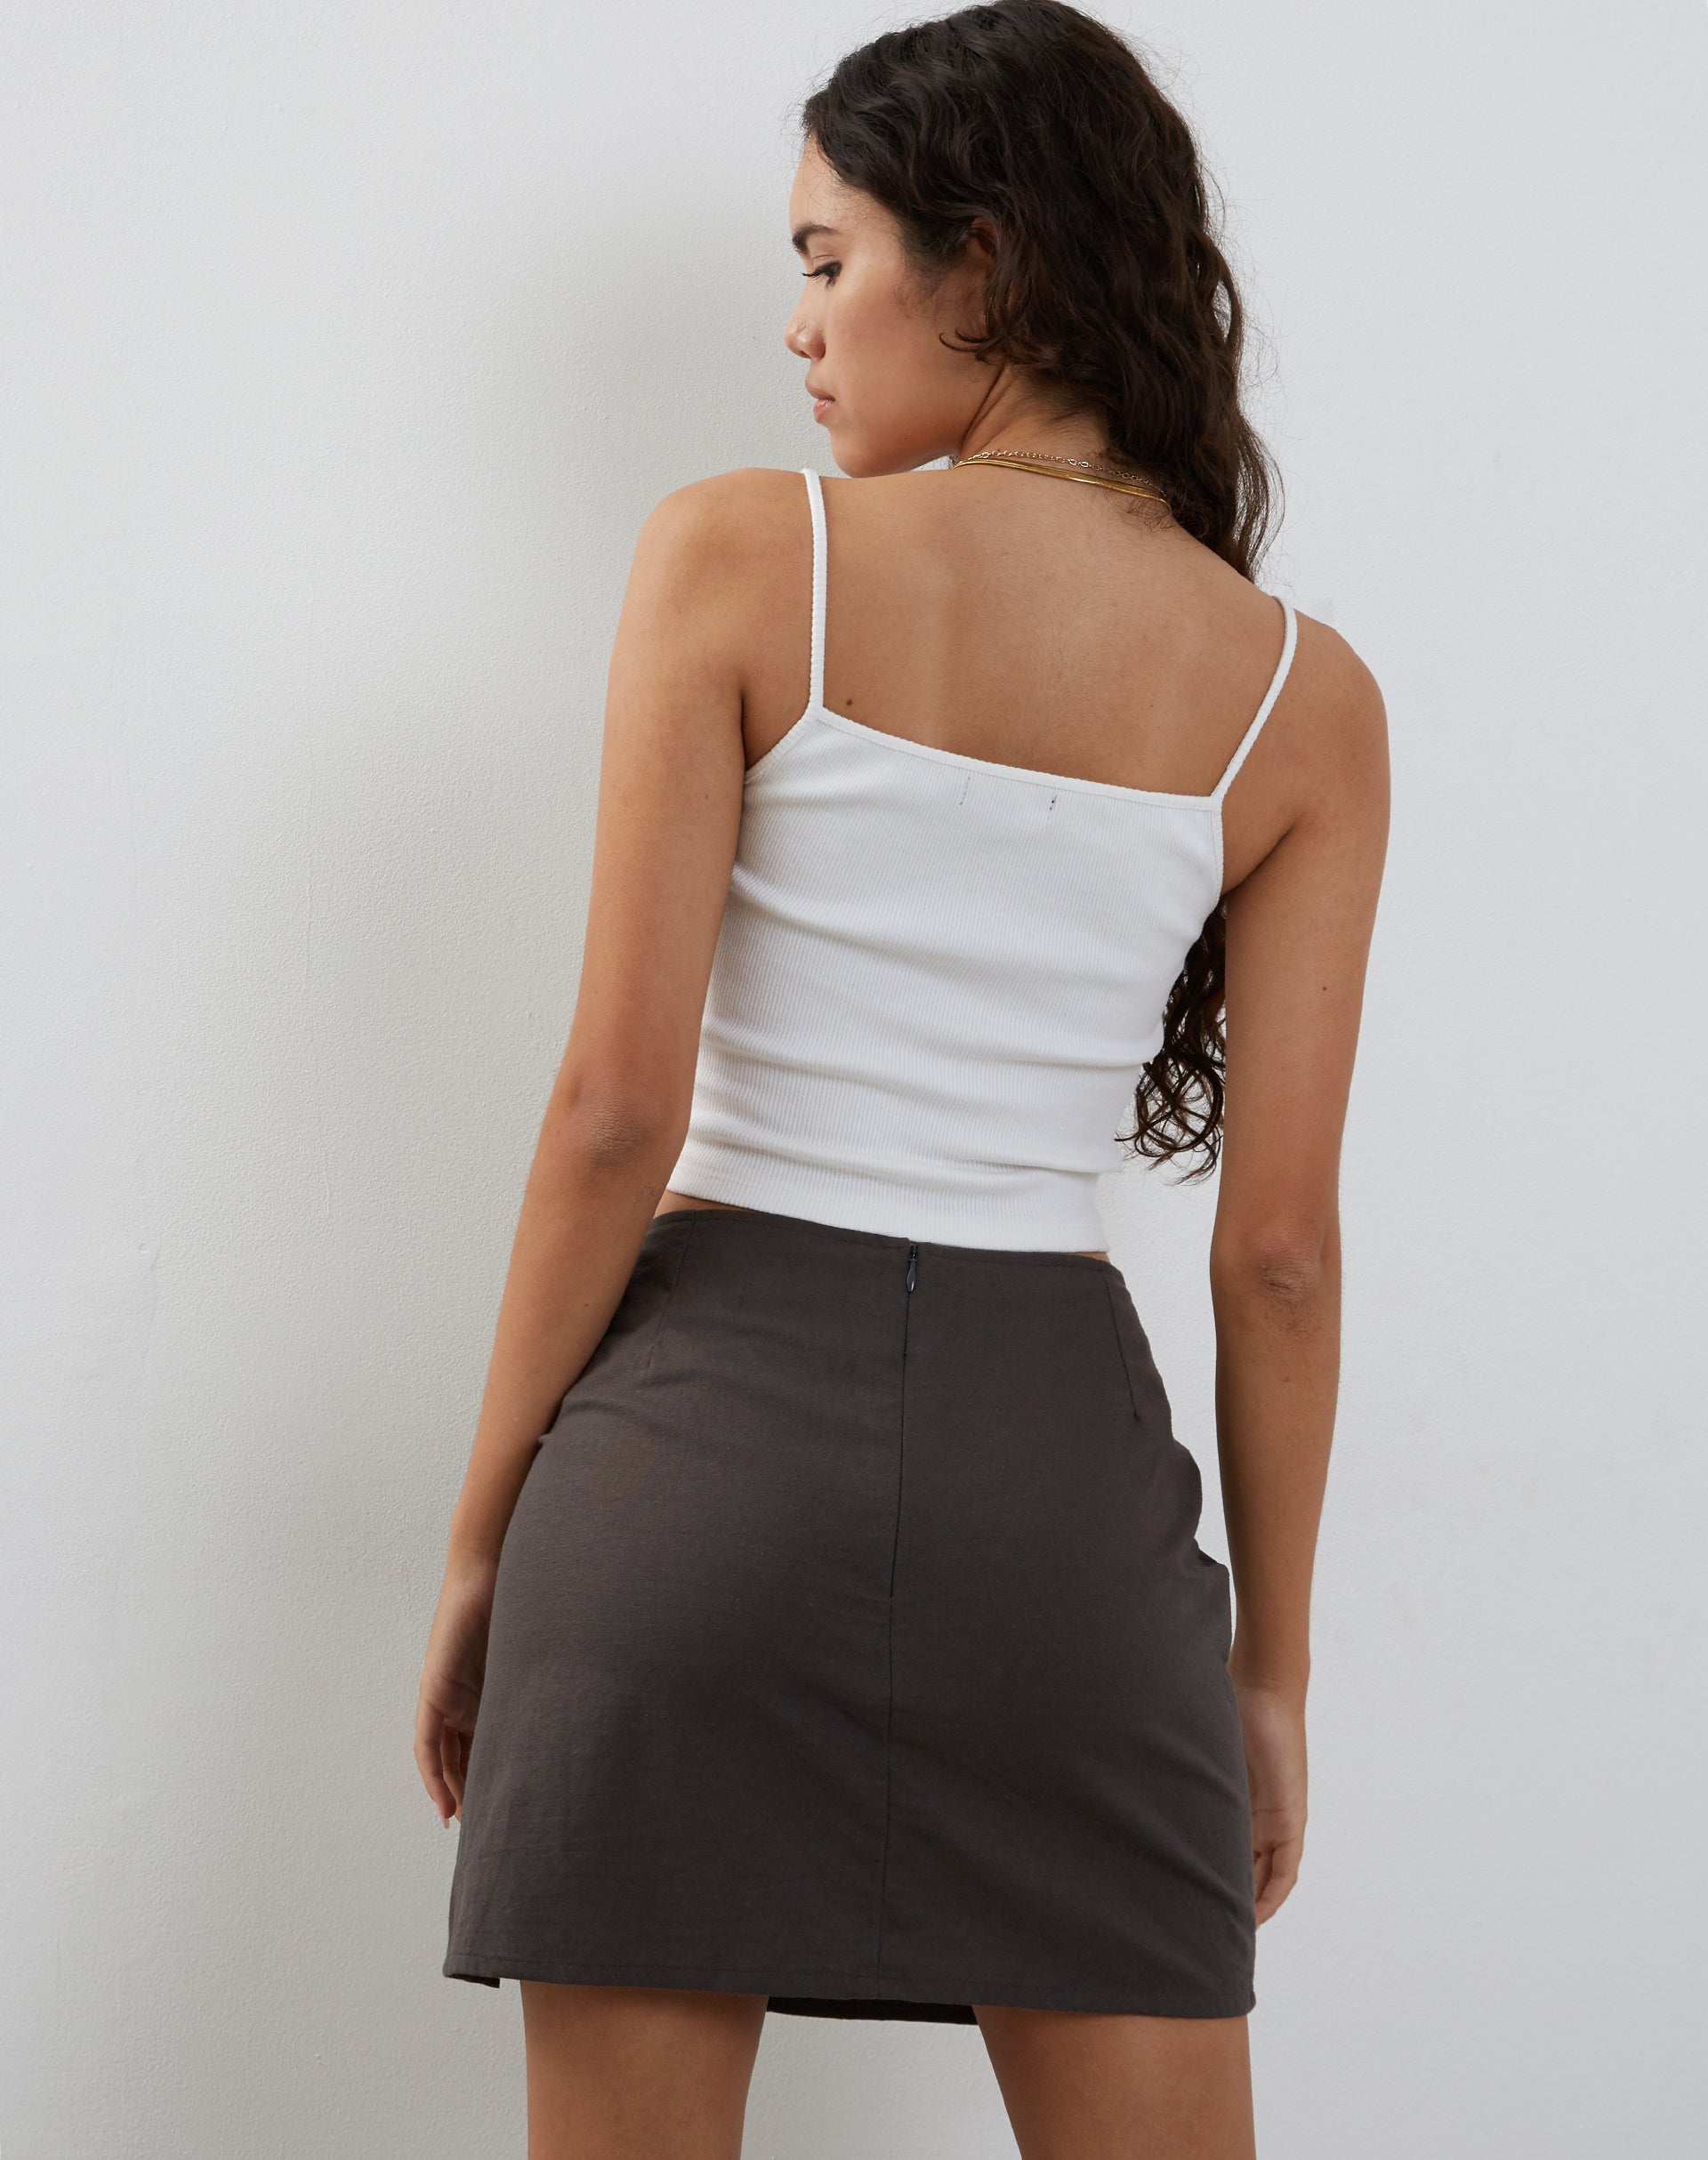 Image of Sheny Mini Skirt in Charcoal Grey